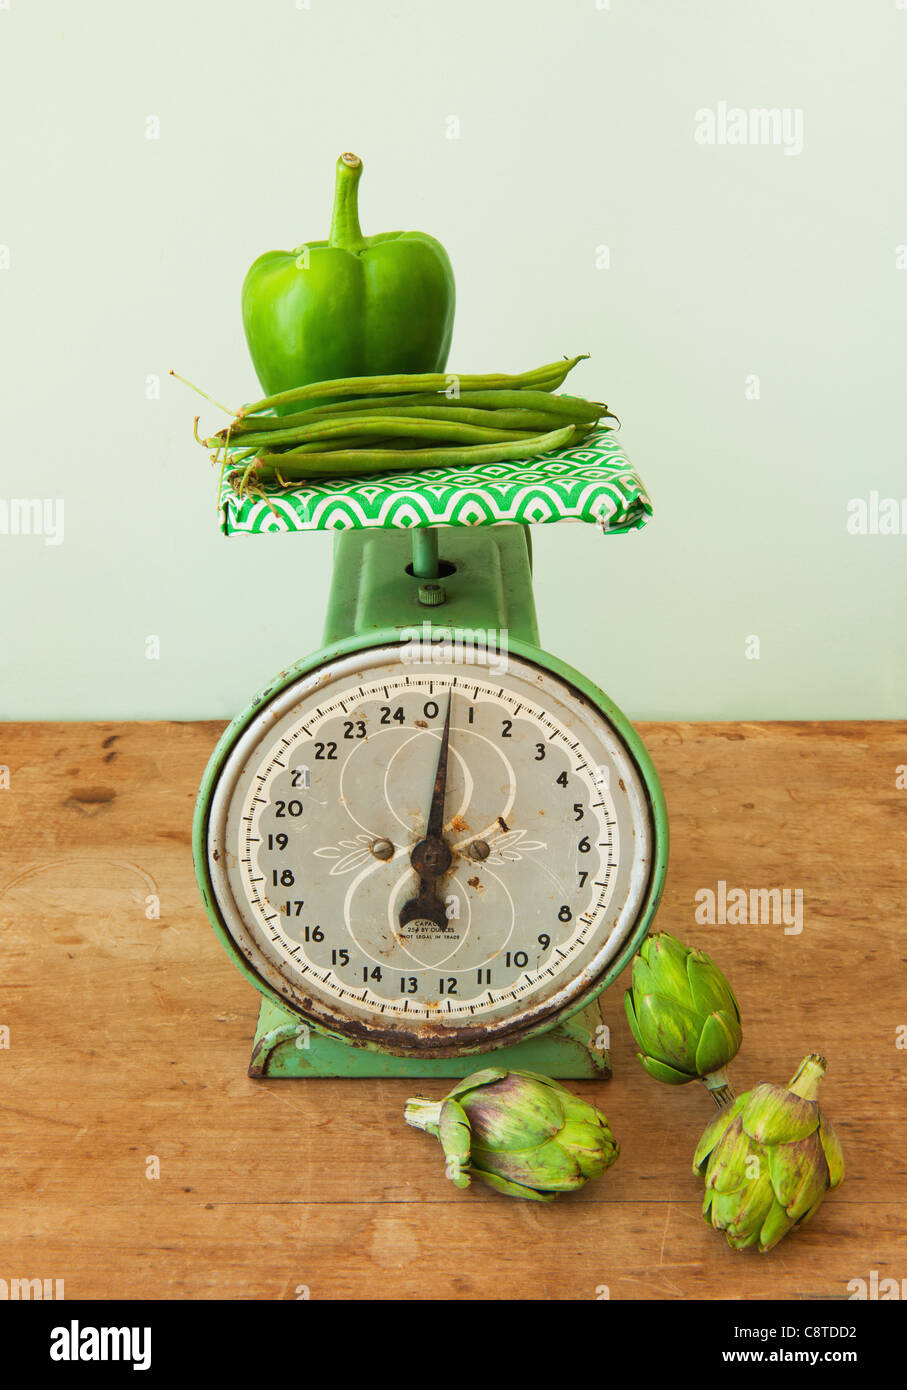 Vegetables on old-fashioned kitchen scale, studio shot Stock Photo